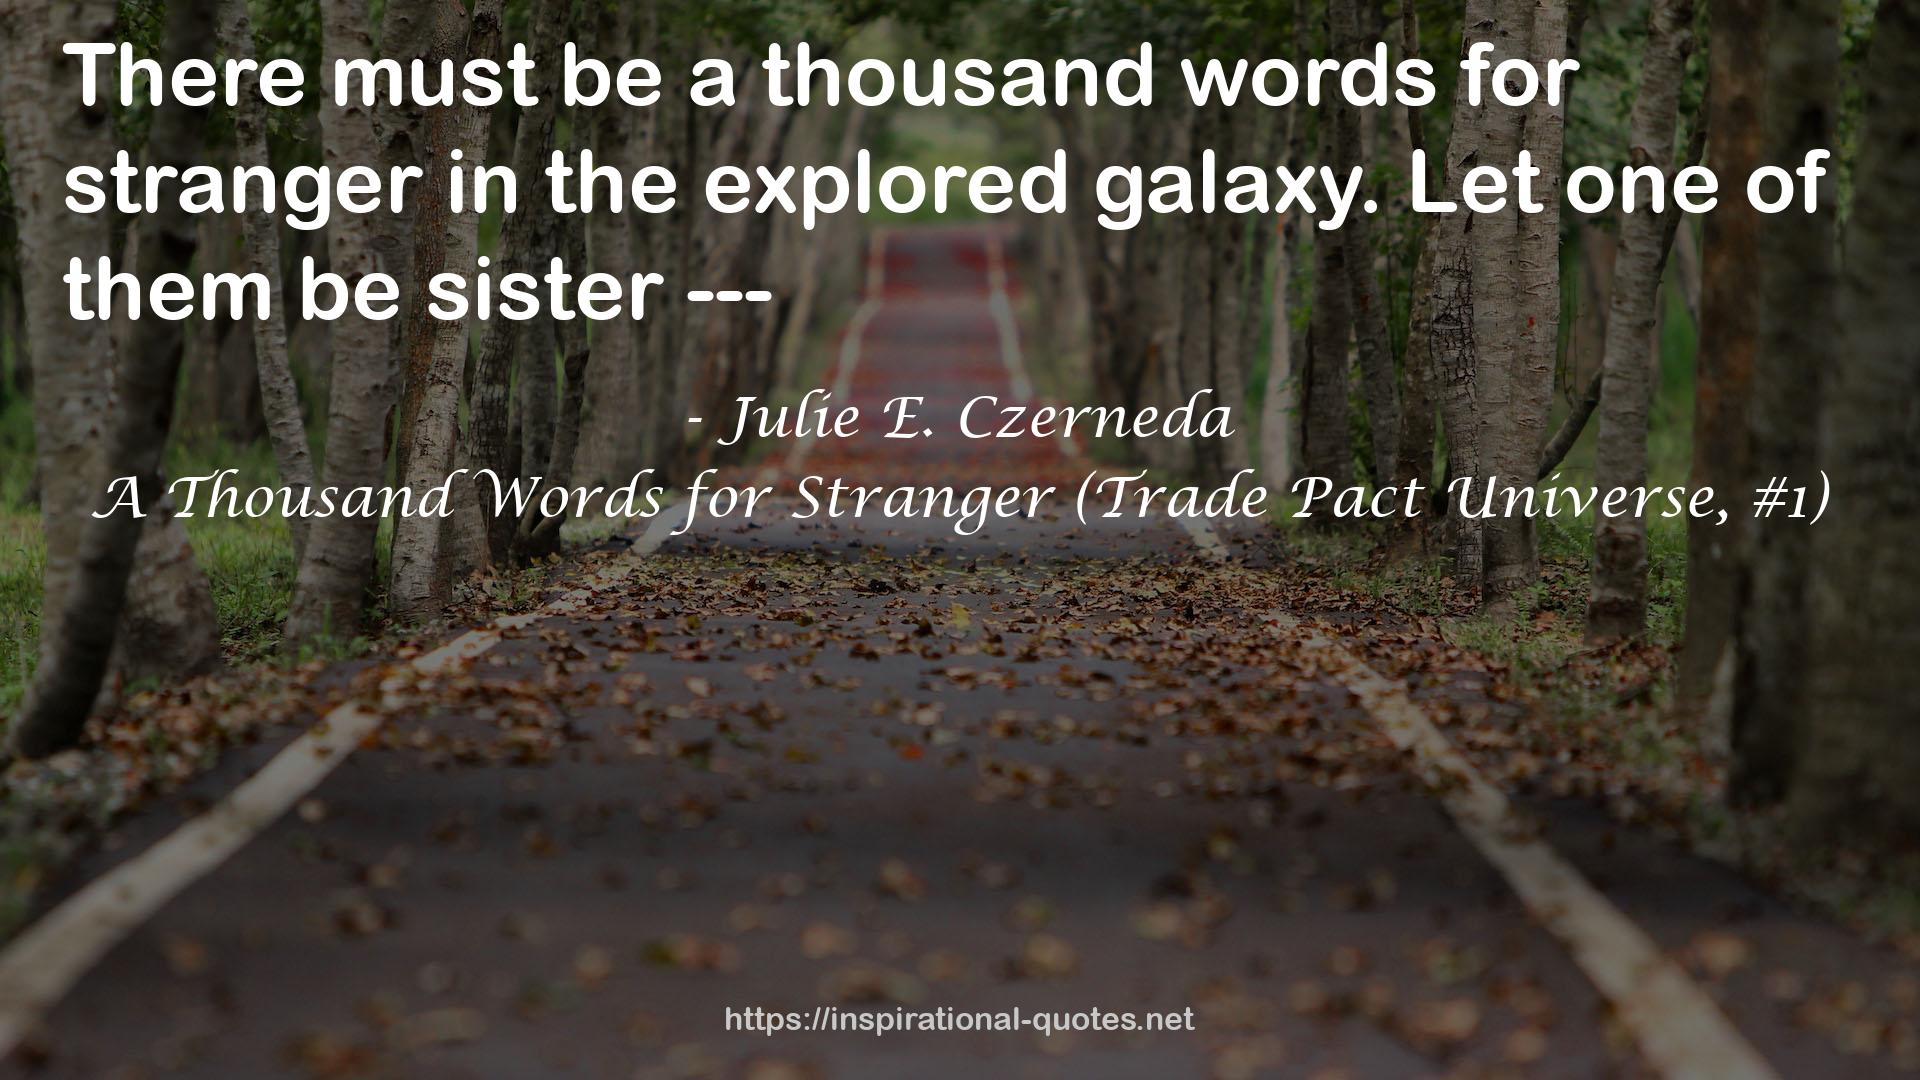 A Thousand Words for Stranger (Trade Pact Universe, #1) QUOTES